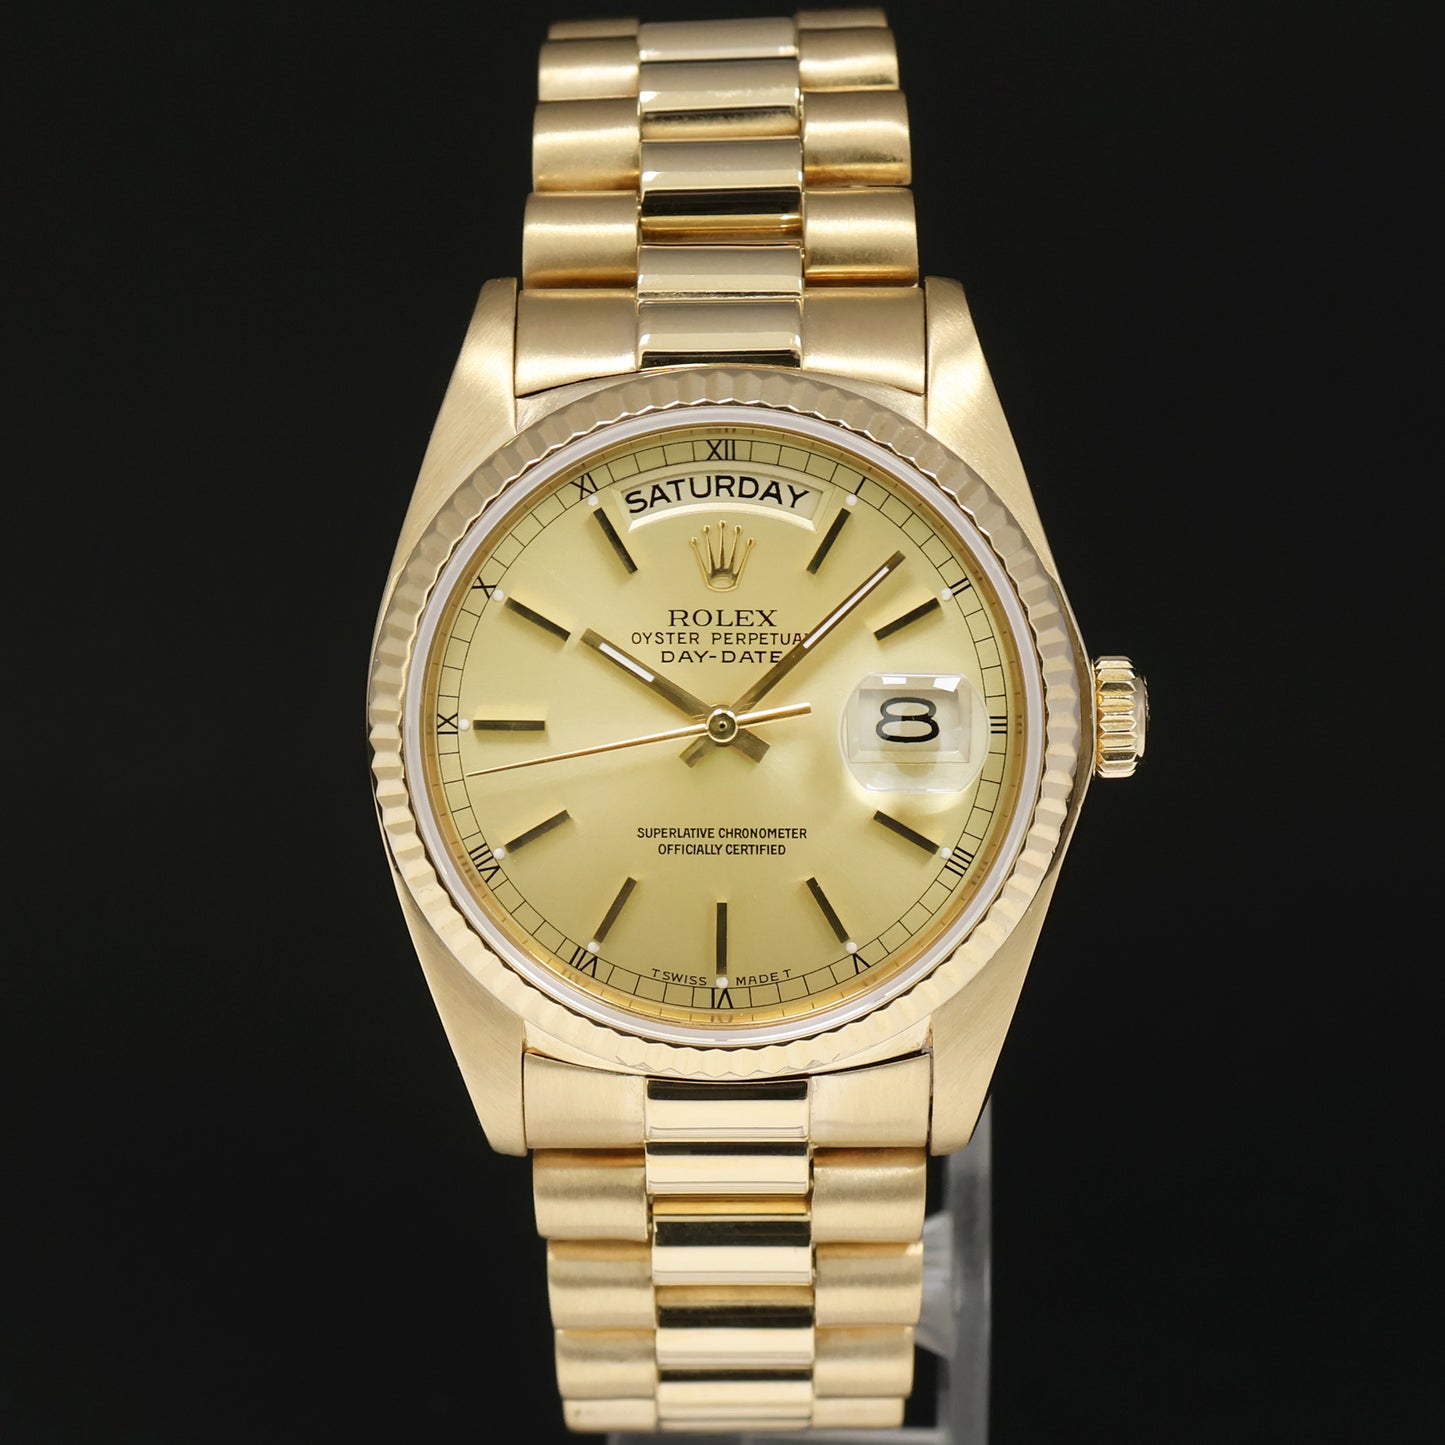 PAPERS MINT Rolex President Day-Date Champagne 18038 Quickset Yellow Gold Watch